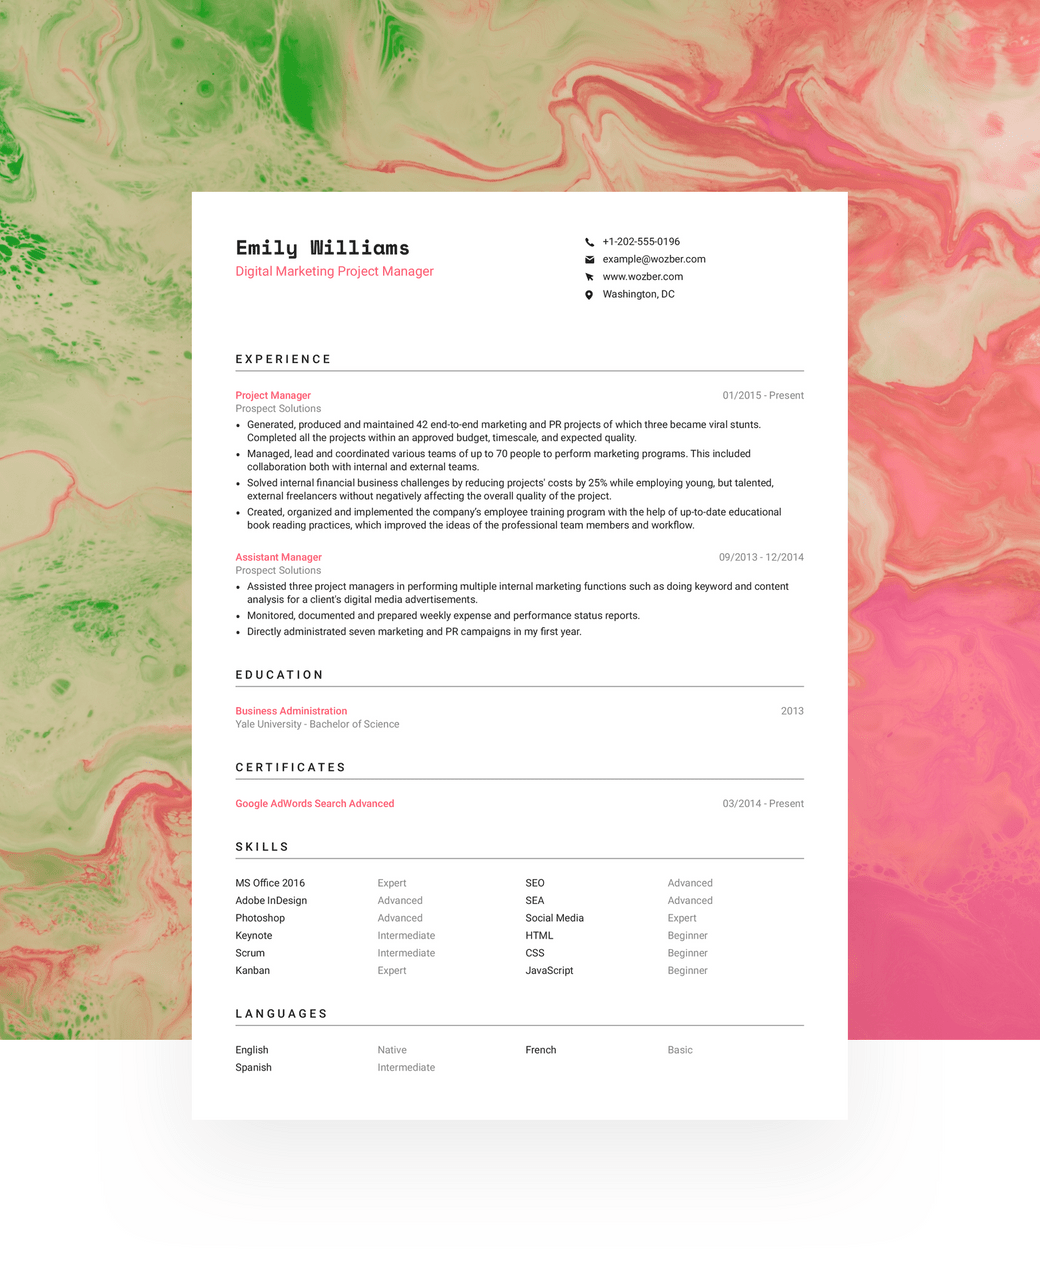 A clean-looking, ATS-friendly CV template suitable for any professional.